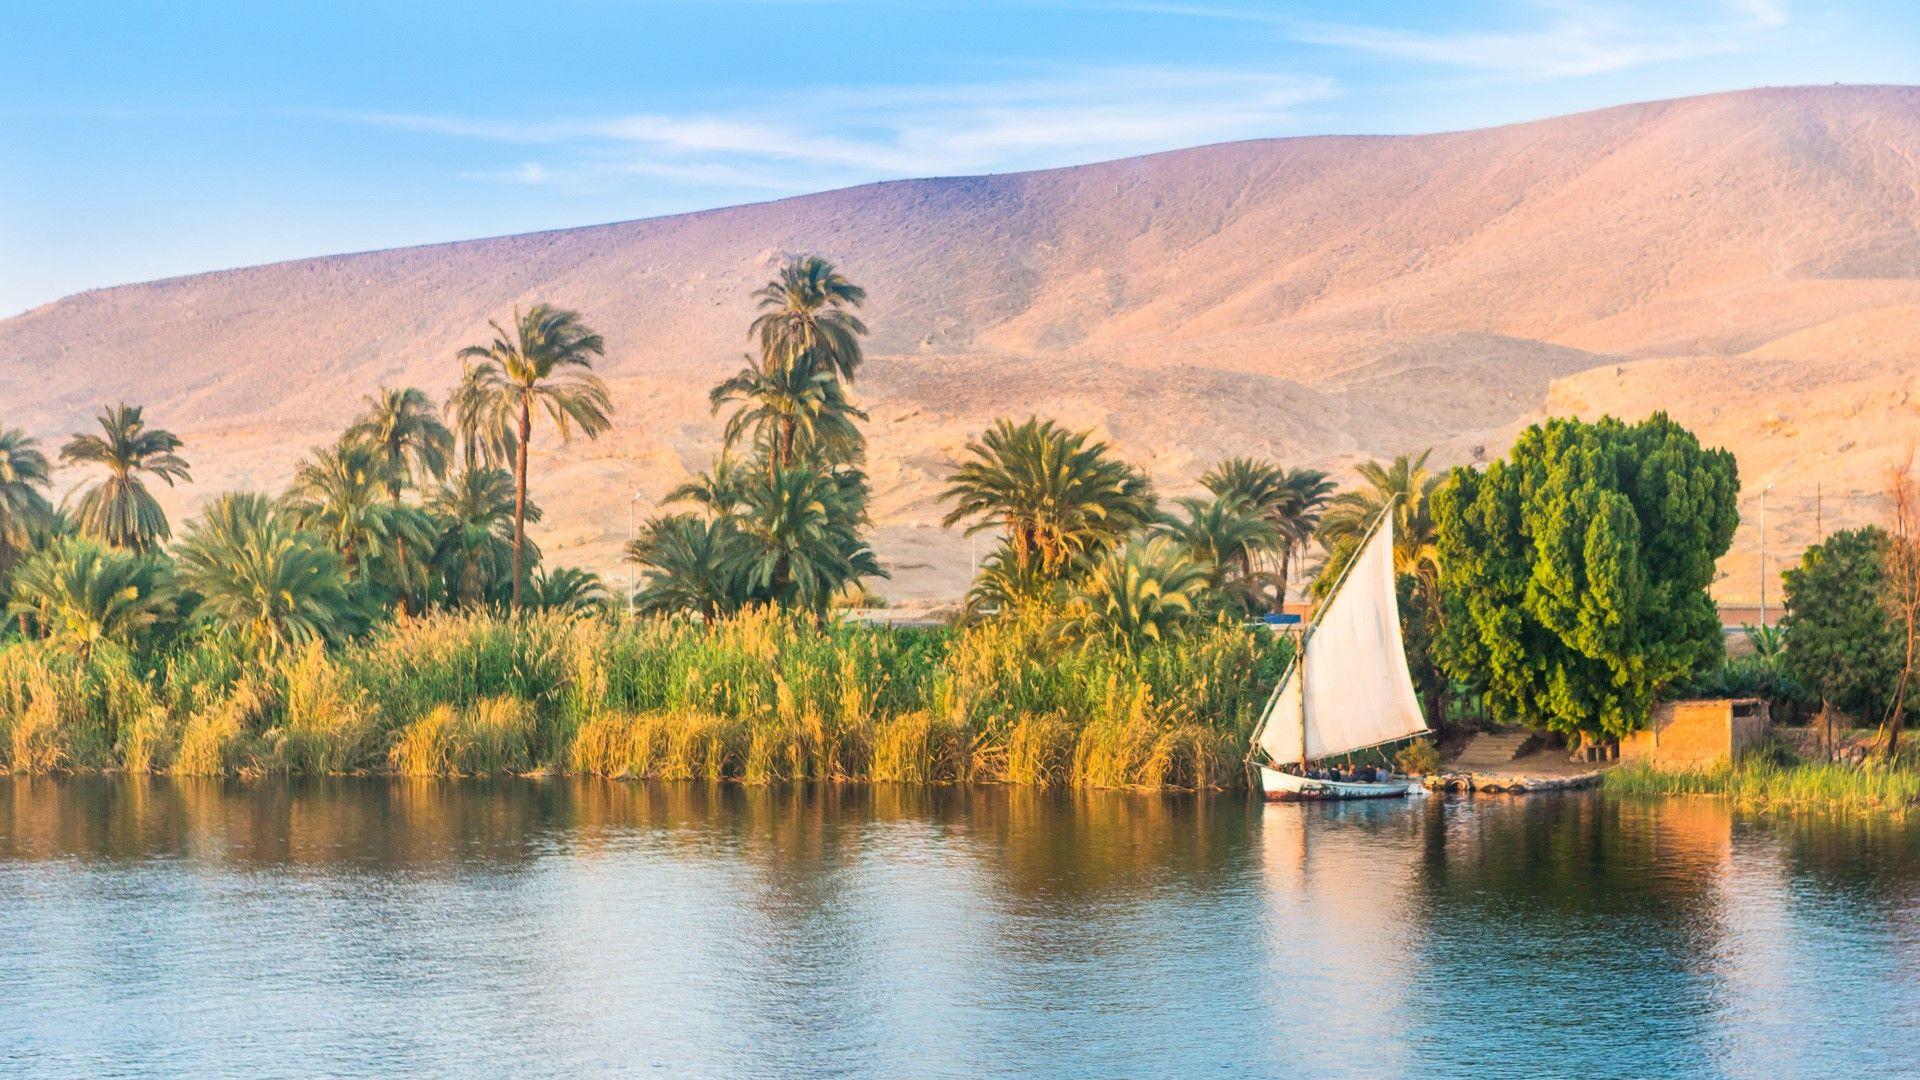 Nile River Hd Wallpapers Top Free Nile River Hd Backgrounds Wallpaperaccess